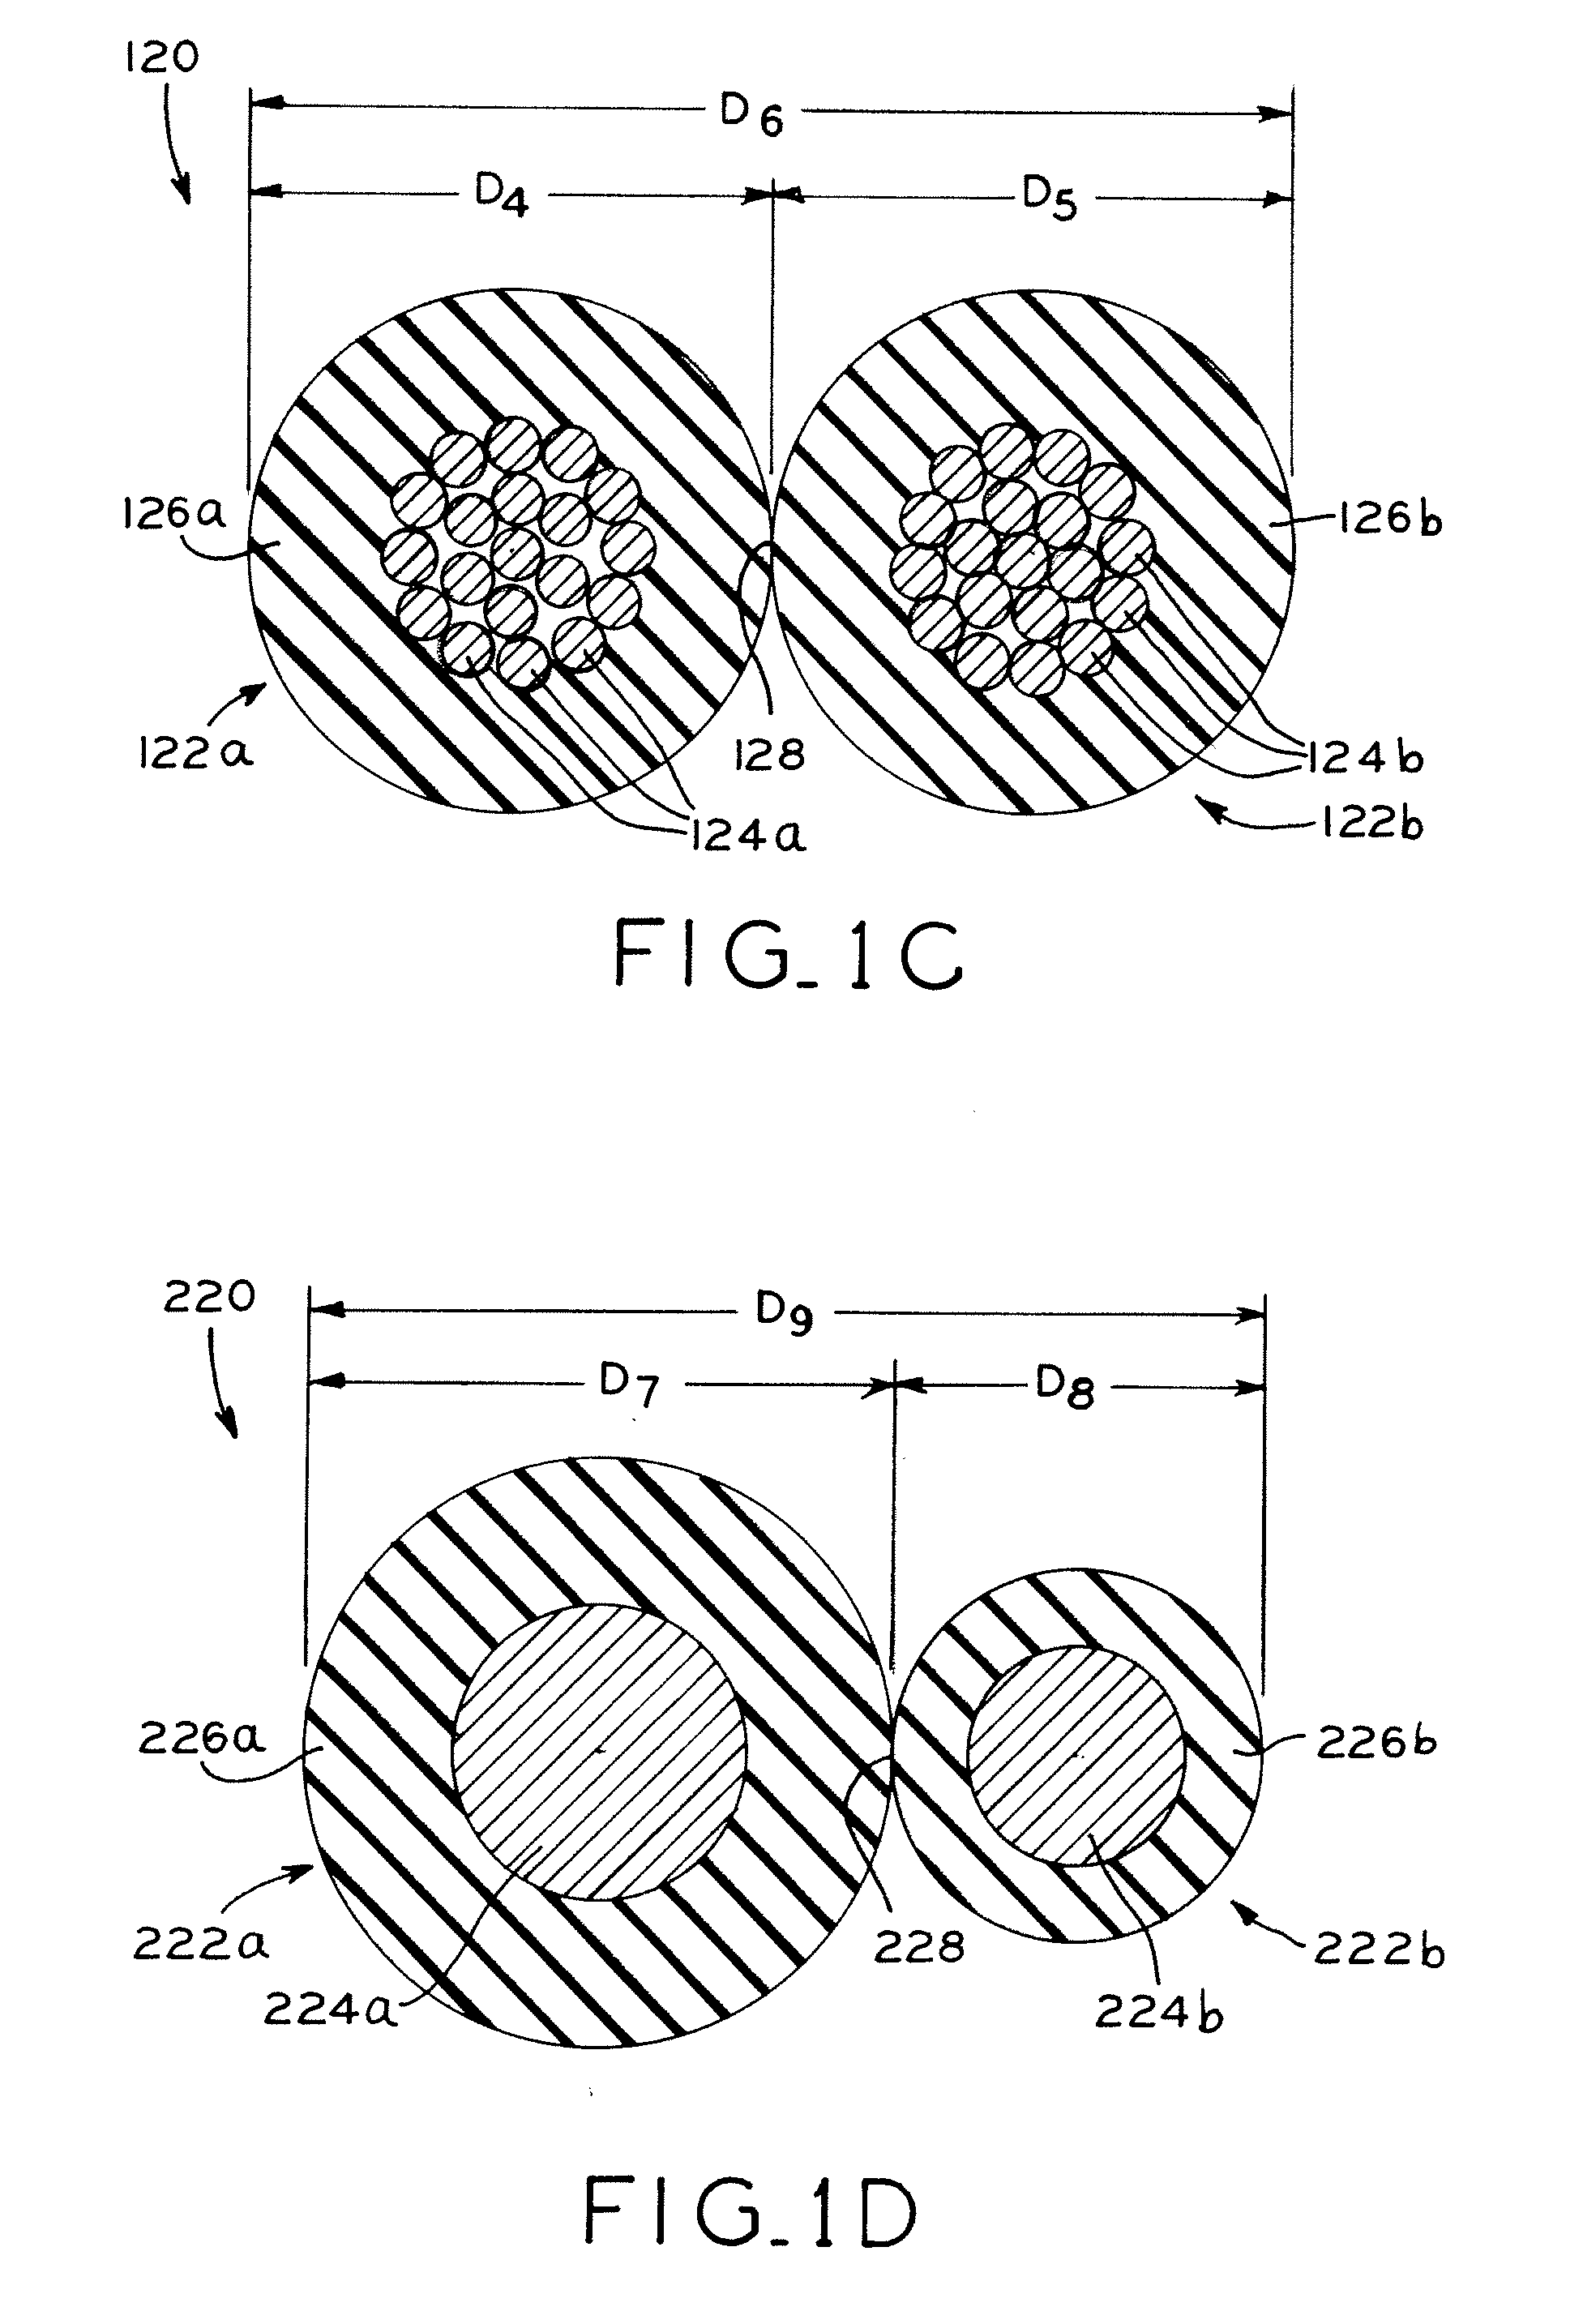 Method for fusing insulated wires, and fused wires produced by such method